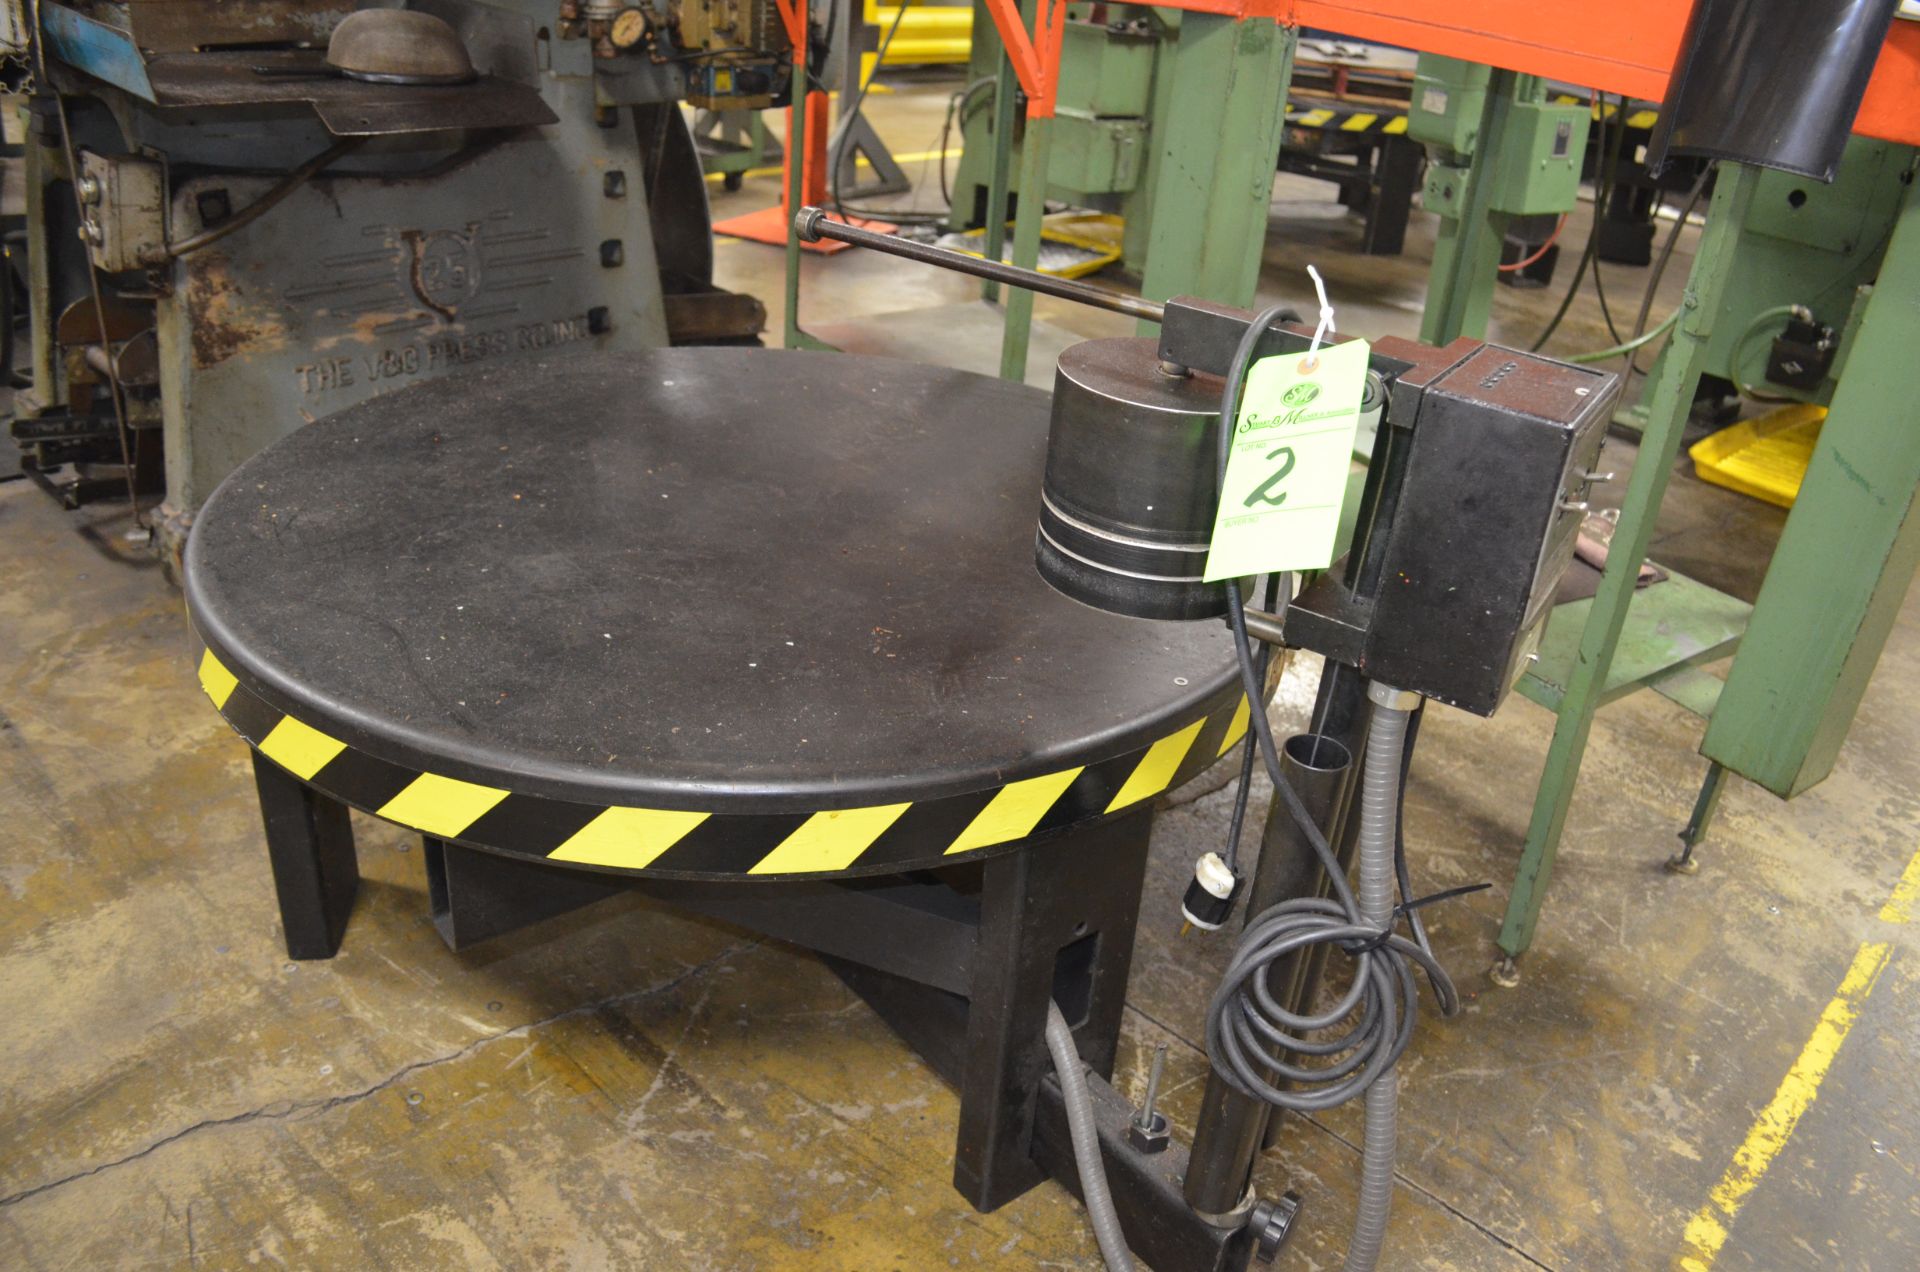 Un-Coiler with 42" turn table, 3,500 lb capacity, with Norwalk Innovation M/N CR3542, S/N 428499